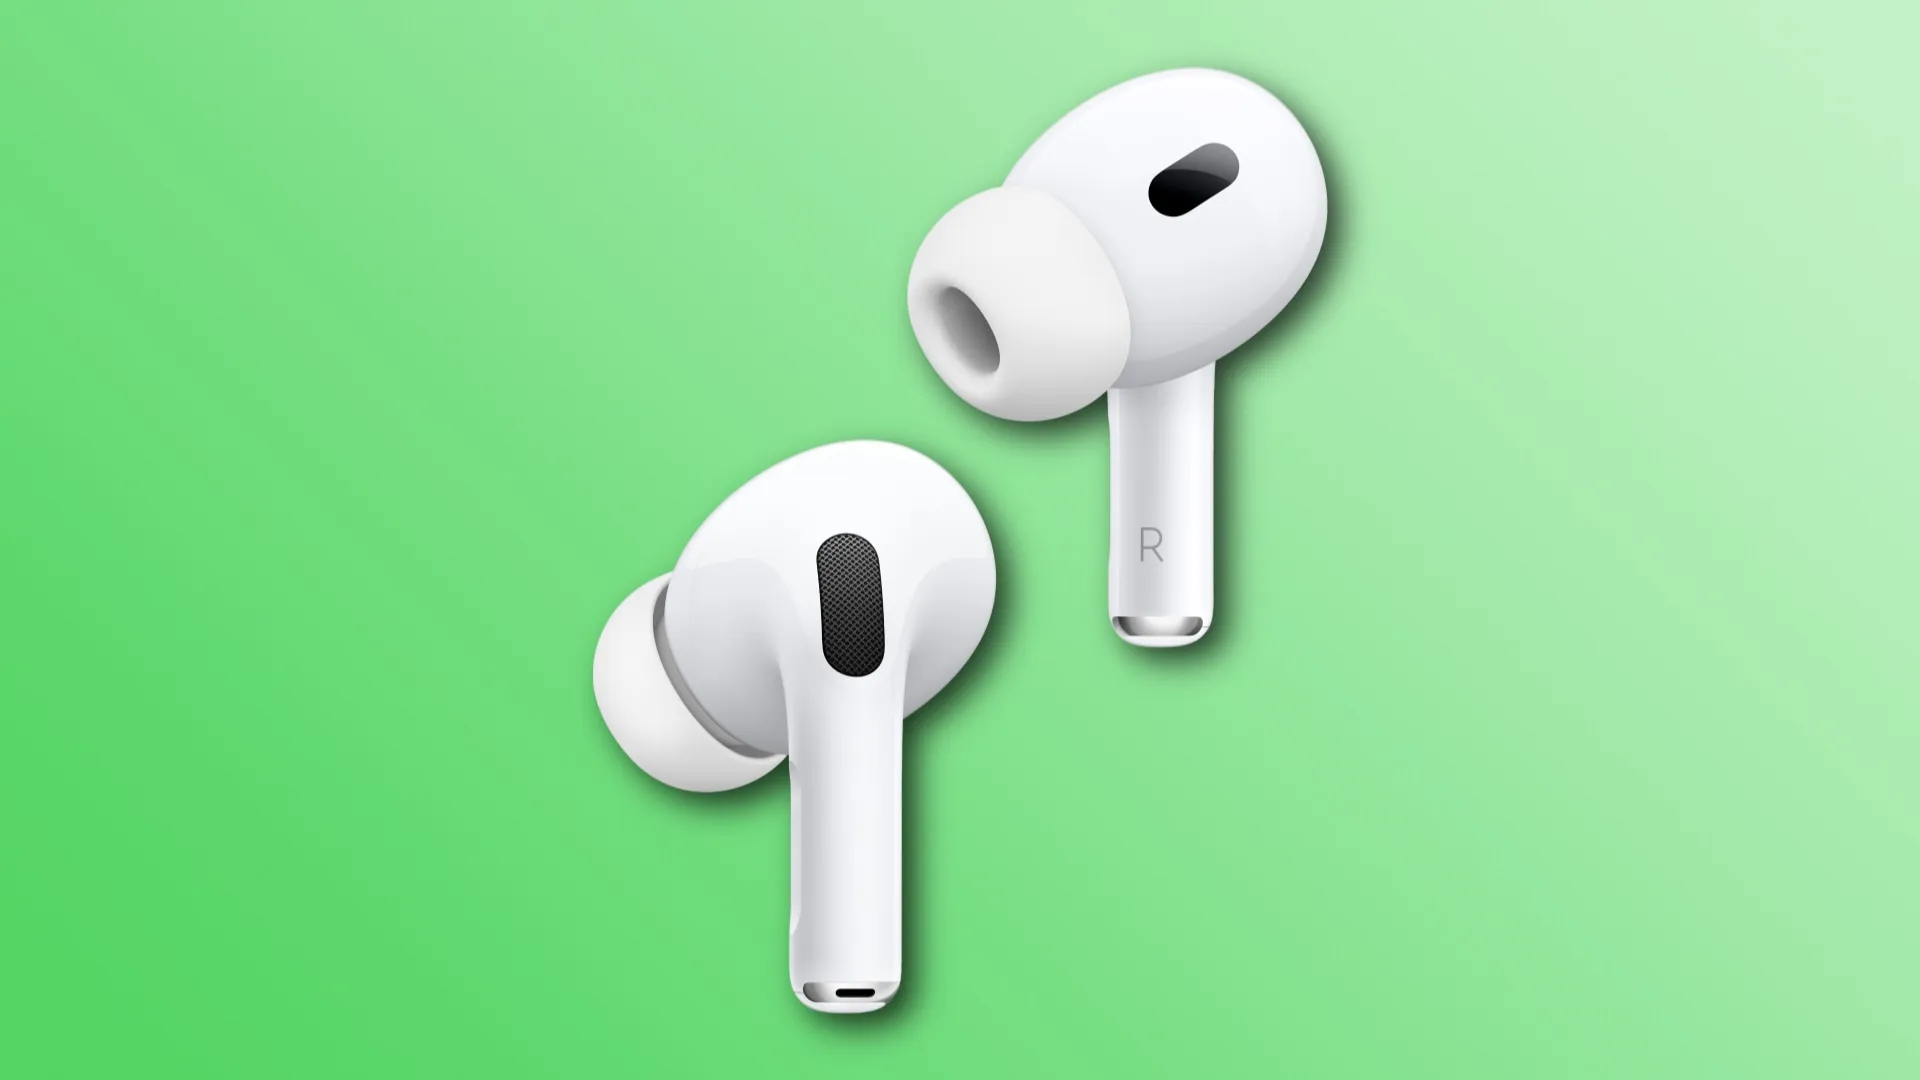 Second-generation AirPods Pro set against a light green gradient background